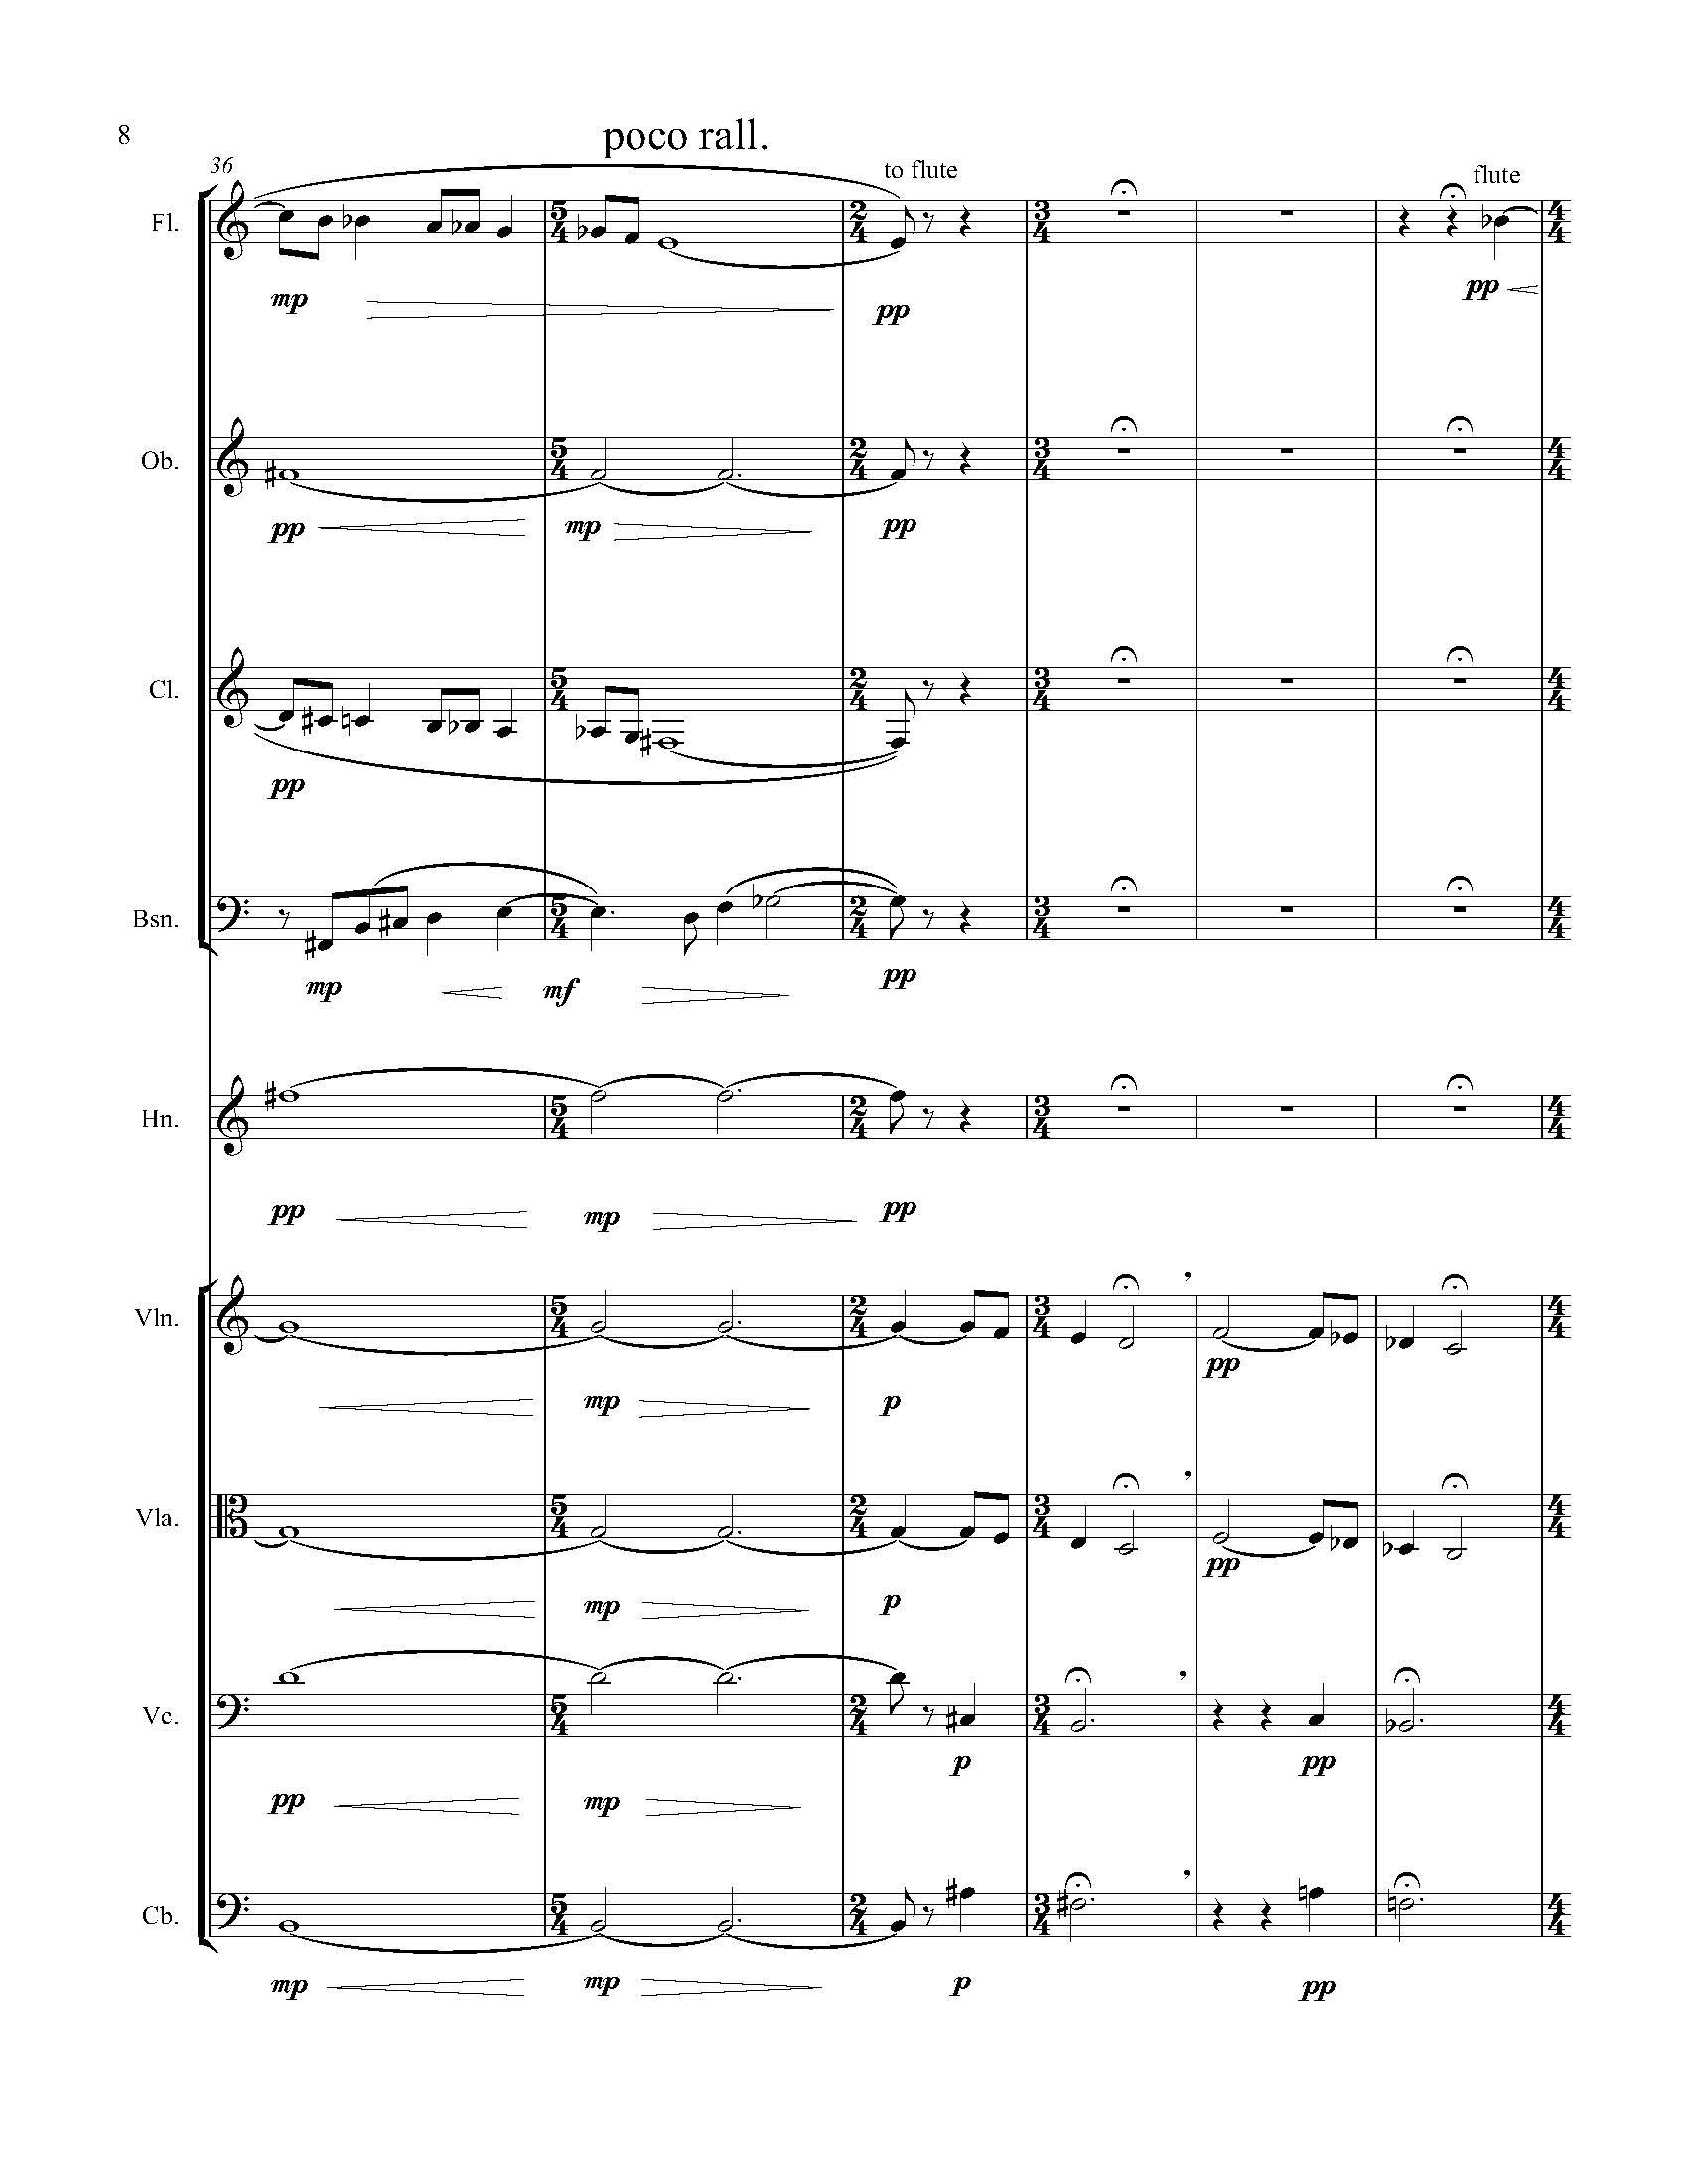 In Search of a Bird - Complete Score_Page_14.jpg